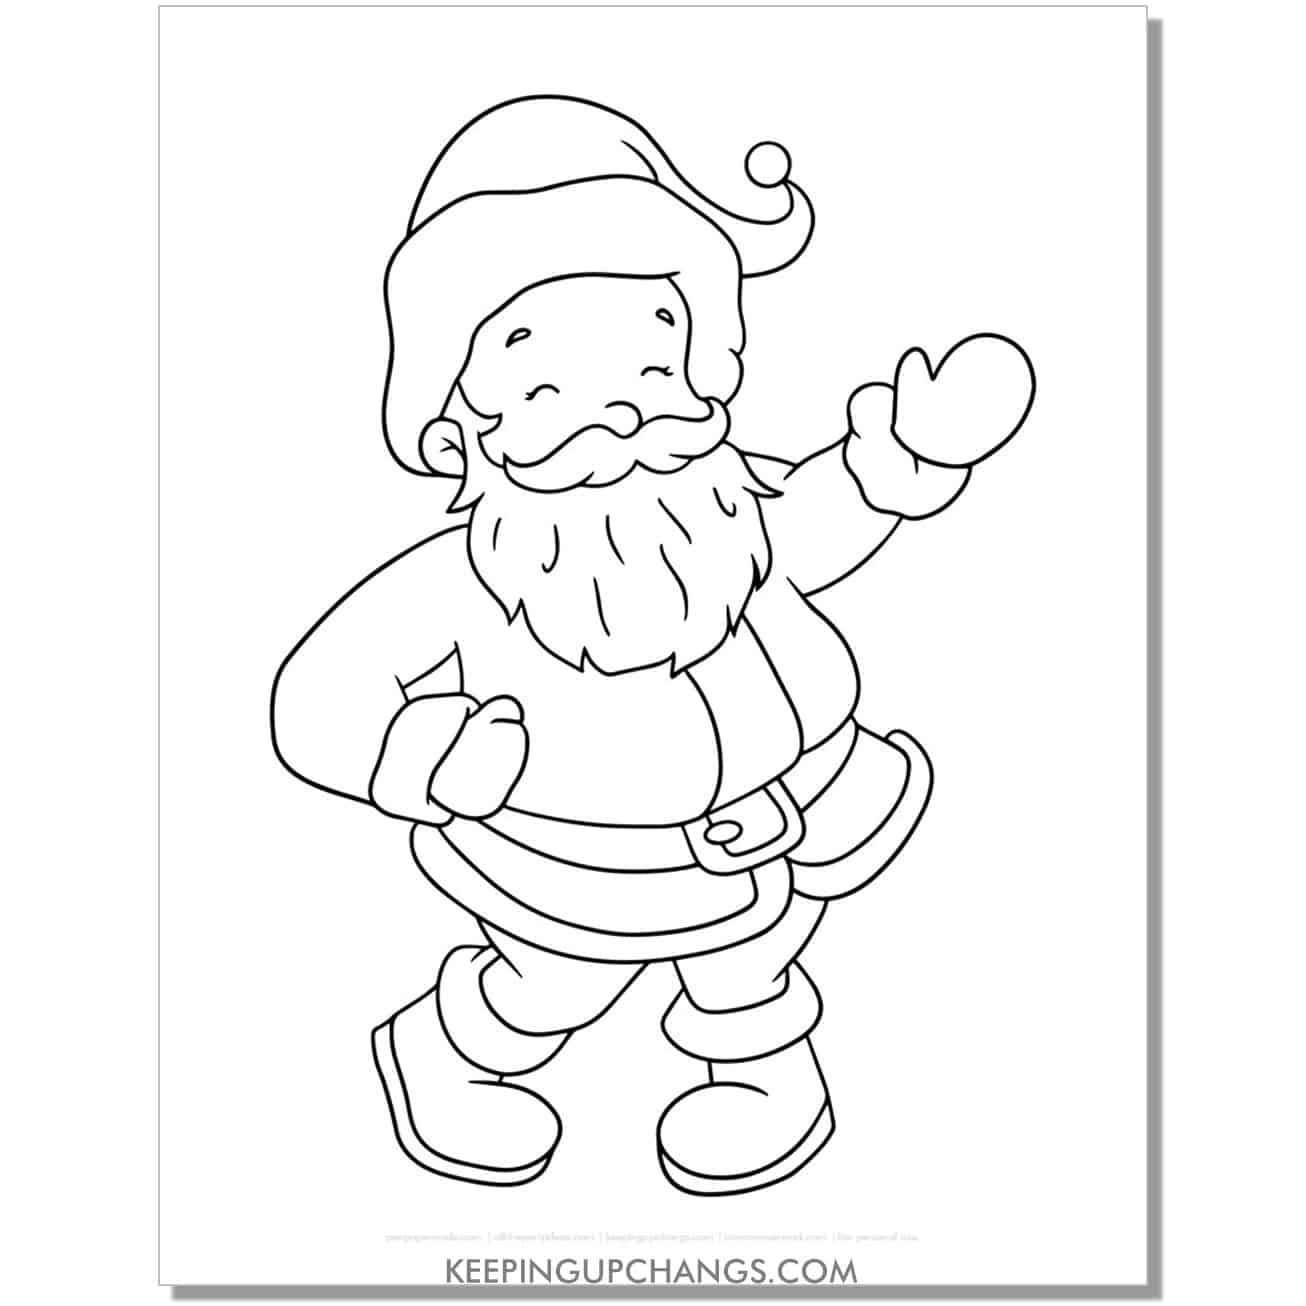 free dancing santa outline, black and white cut out template.